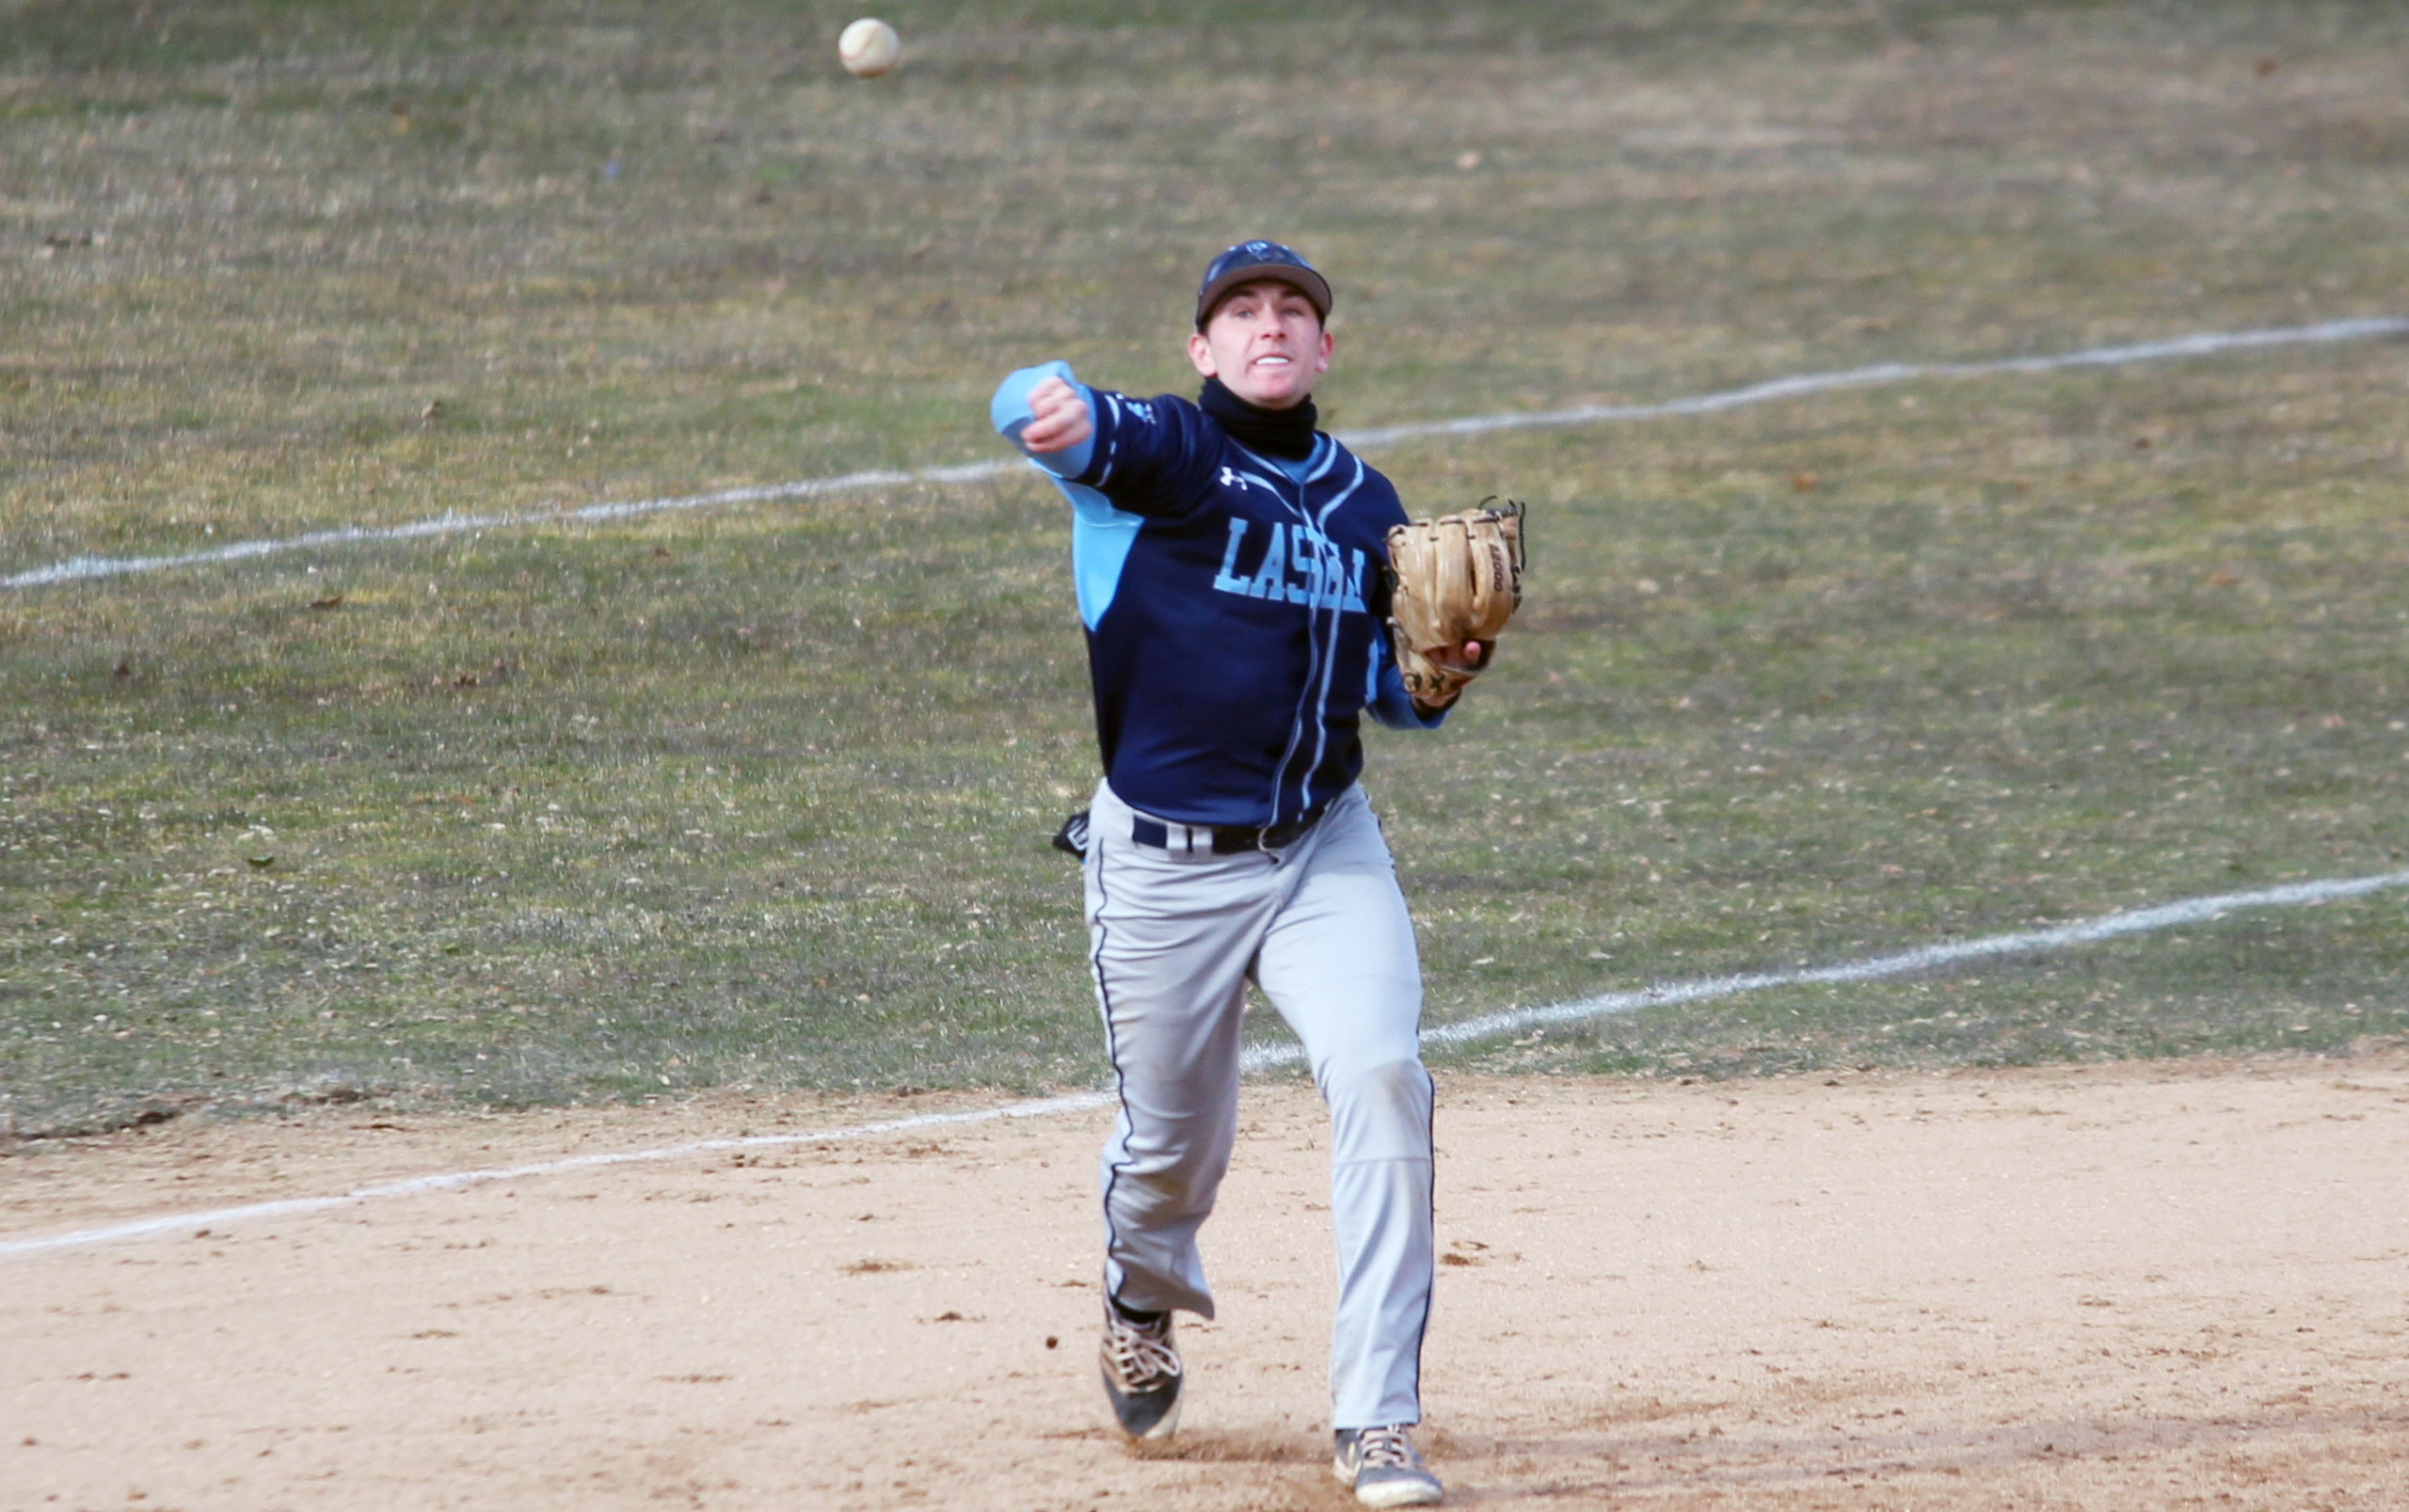 Lasell Baseball trades victories with Johnson & Wales